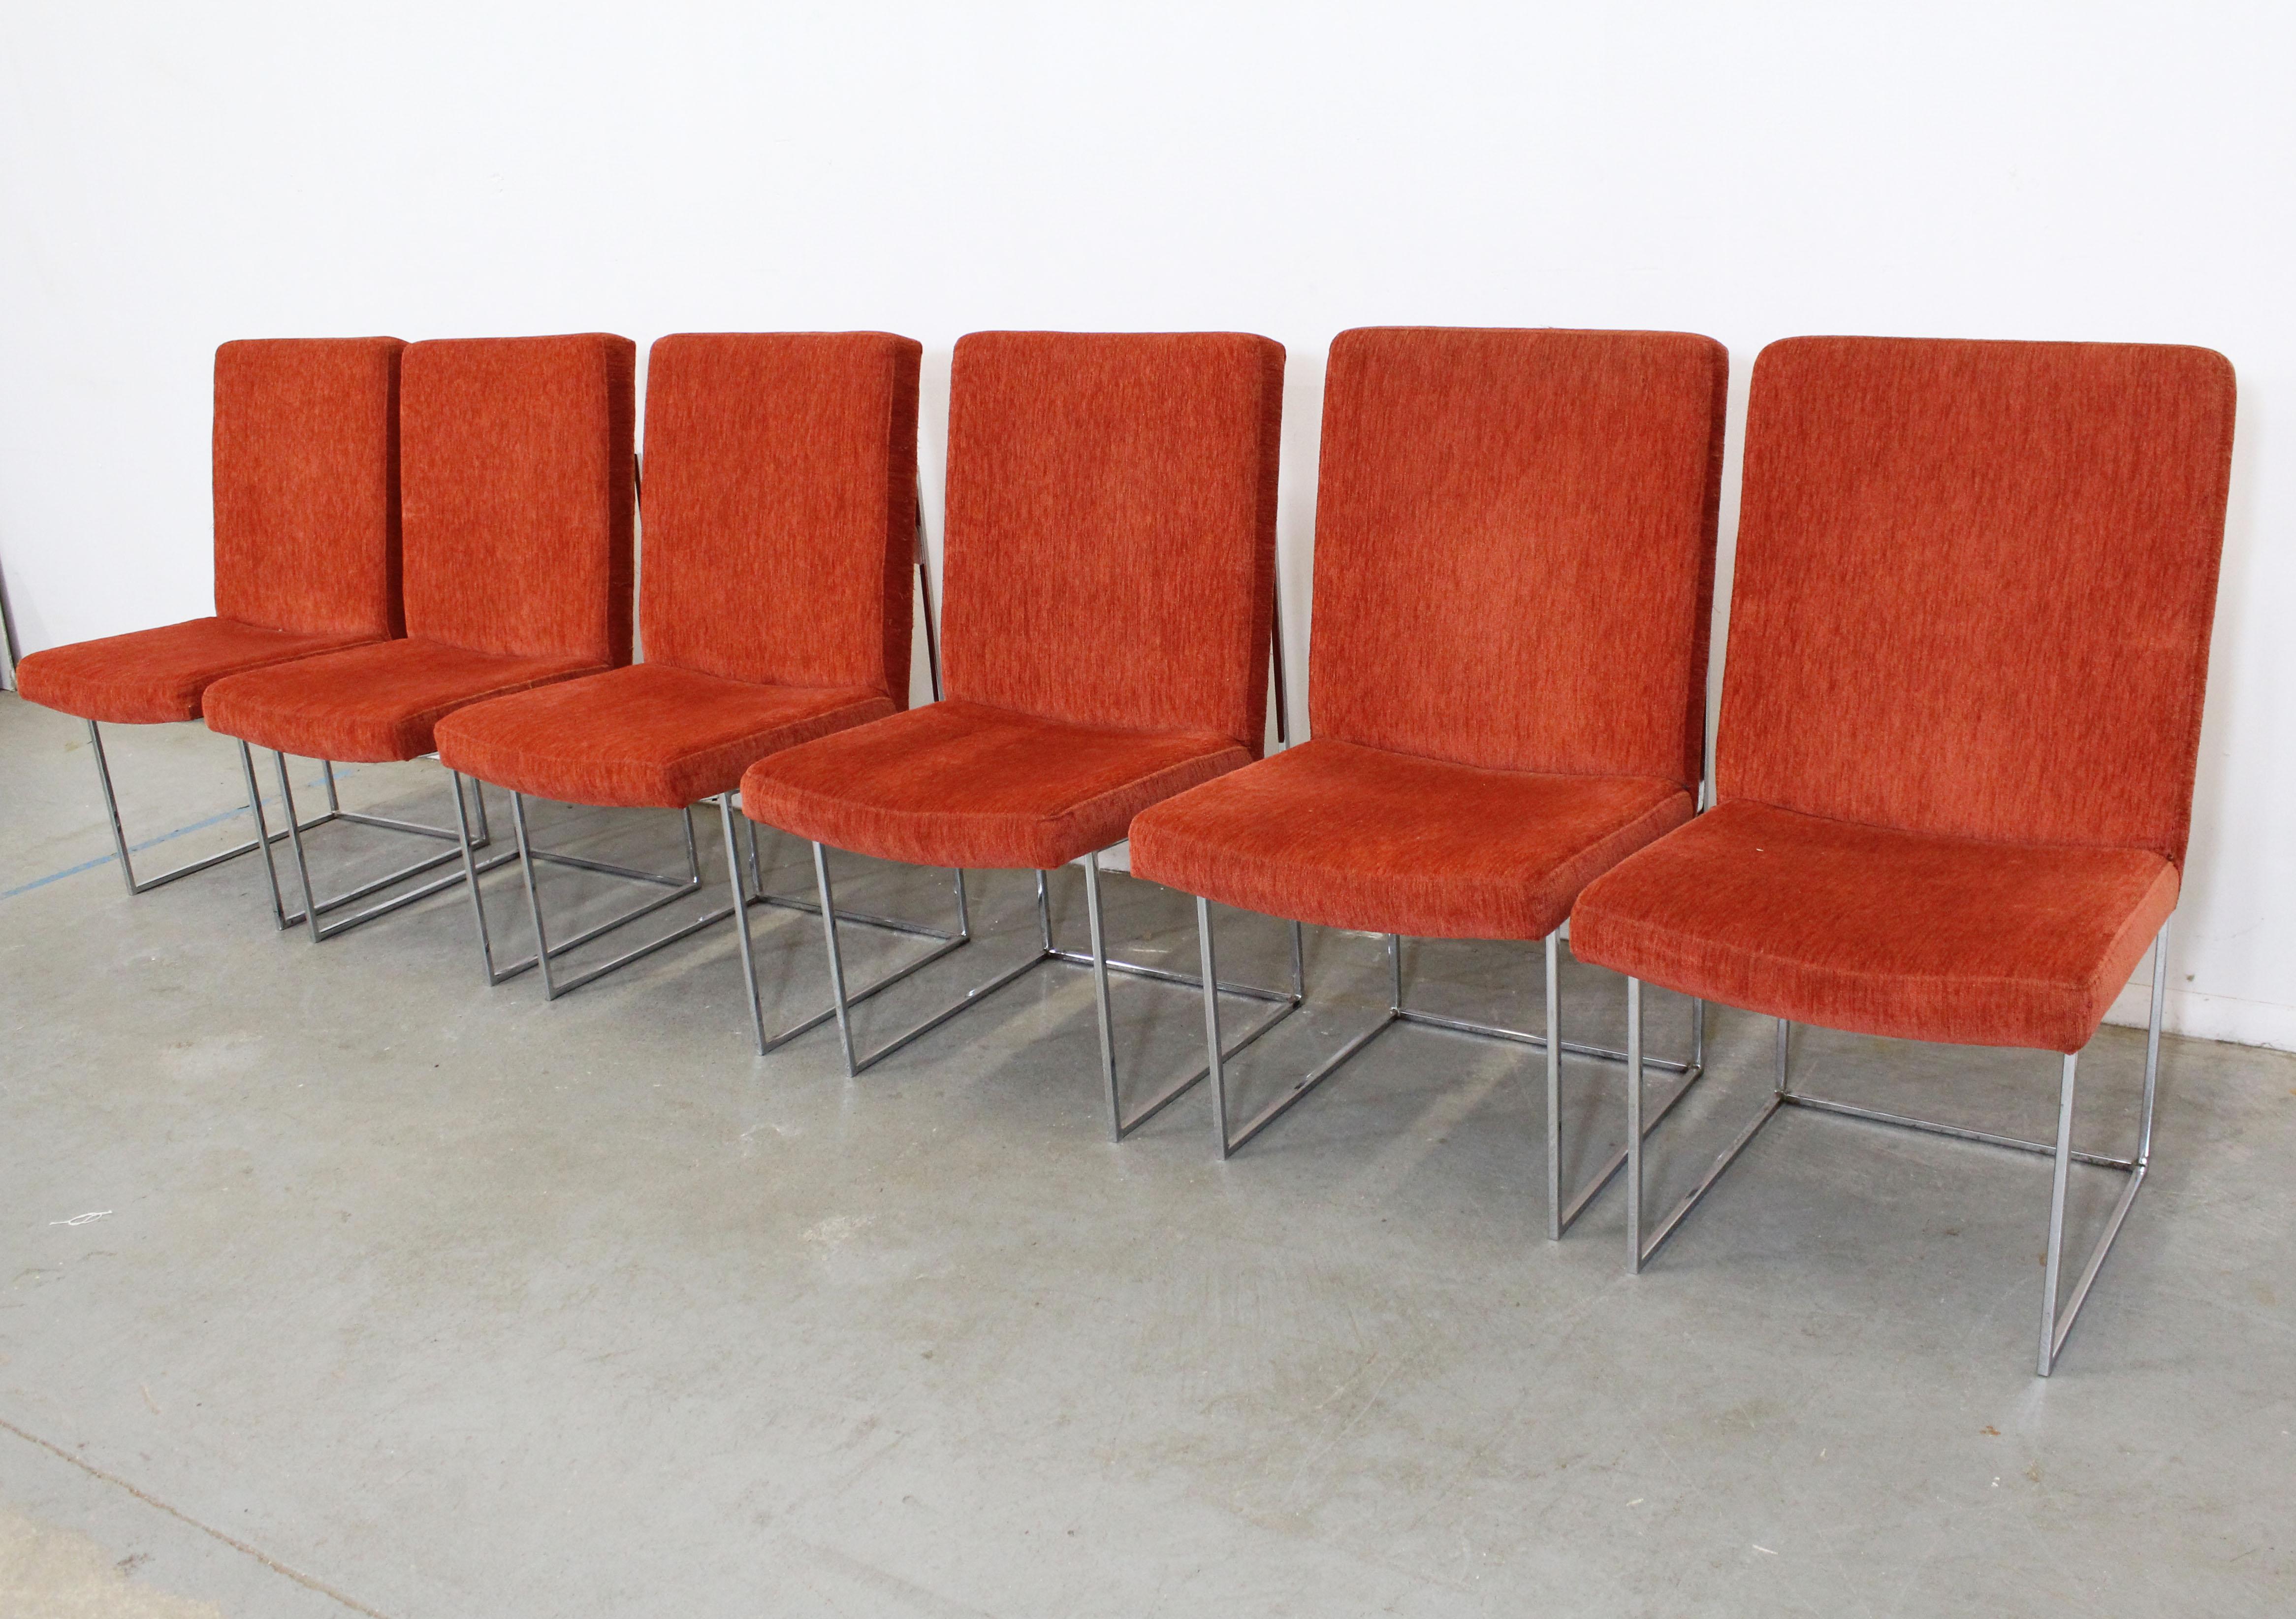 What a find. Offered is a vintage set of 6 Mid-Century Modern dining chairs by Milo Baughman for Thayer Coggin. These beautiful chairs have chrome bases and orange upholstery. In good condition for their age, but need to be reupholstered. Has some